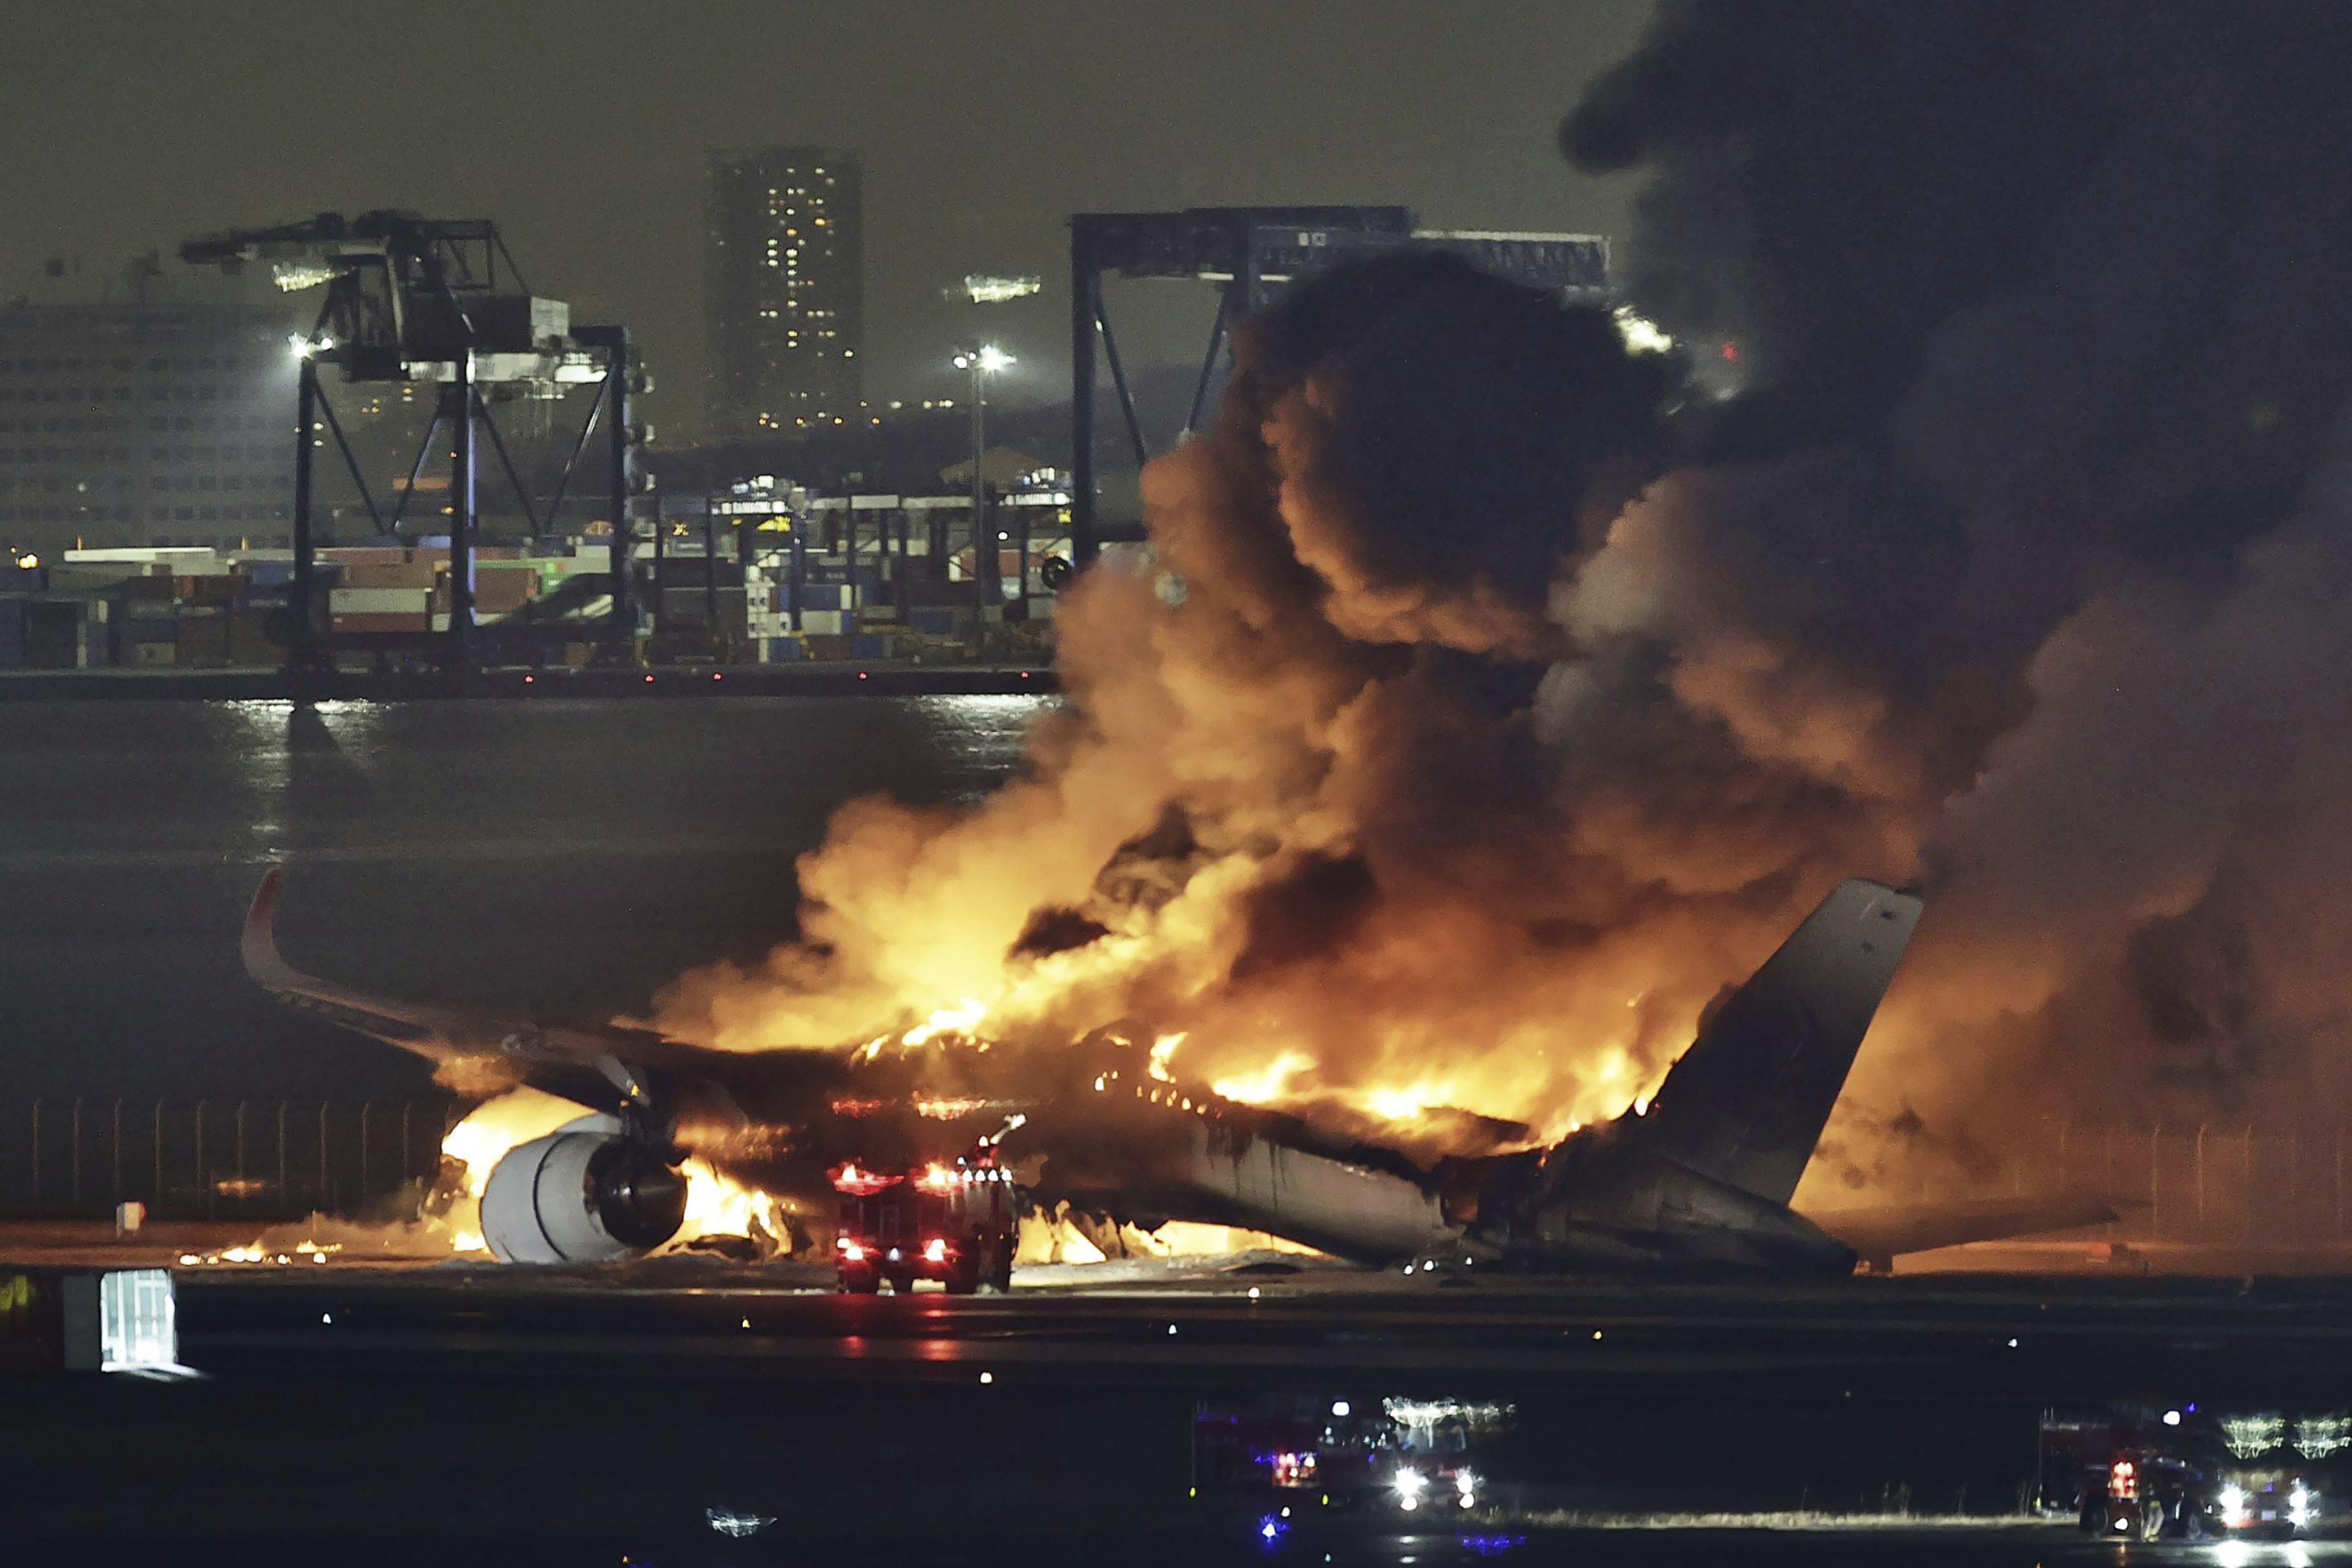 A Japan Airlines plane on fire at Tokyo’s Haneda airport on January 2. Photo: Kyodo News via AP